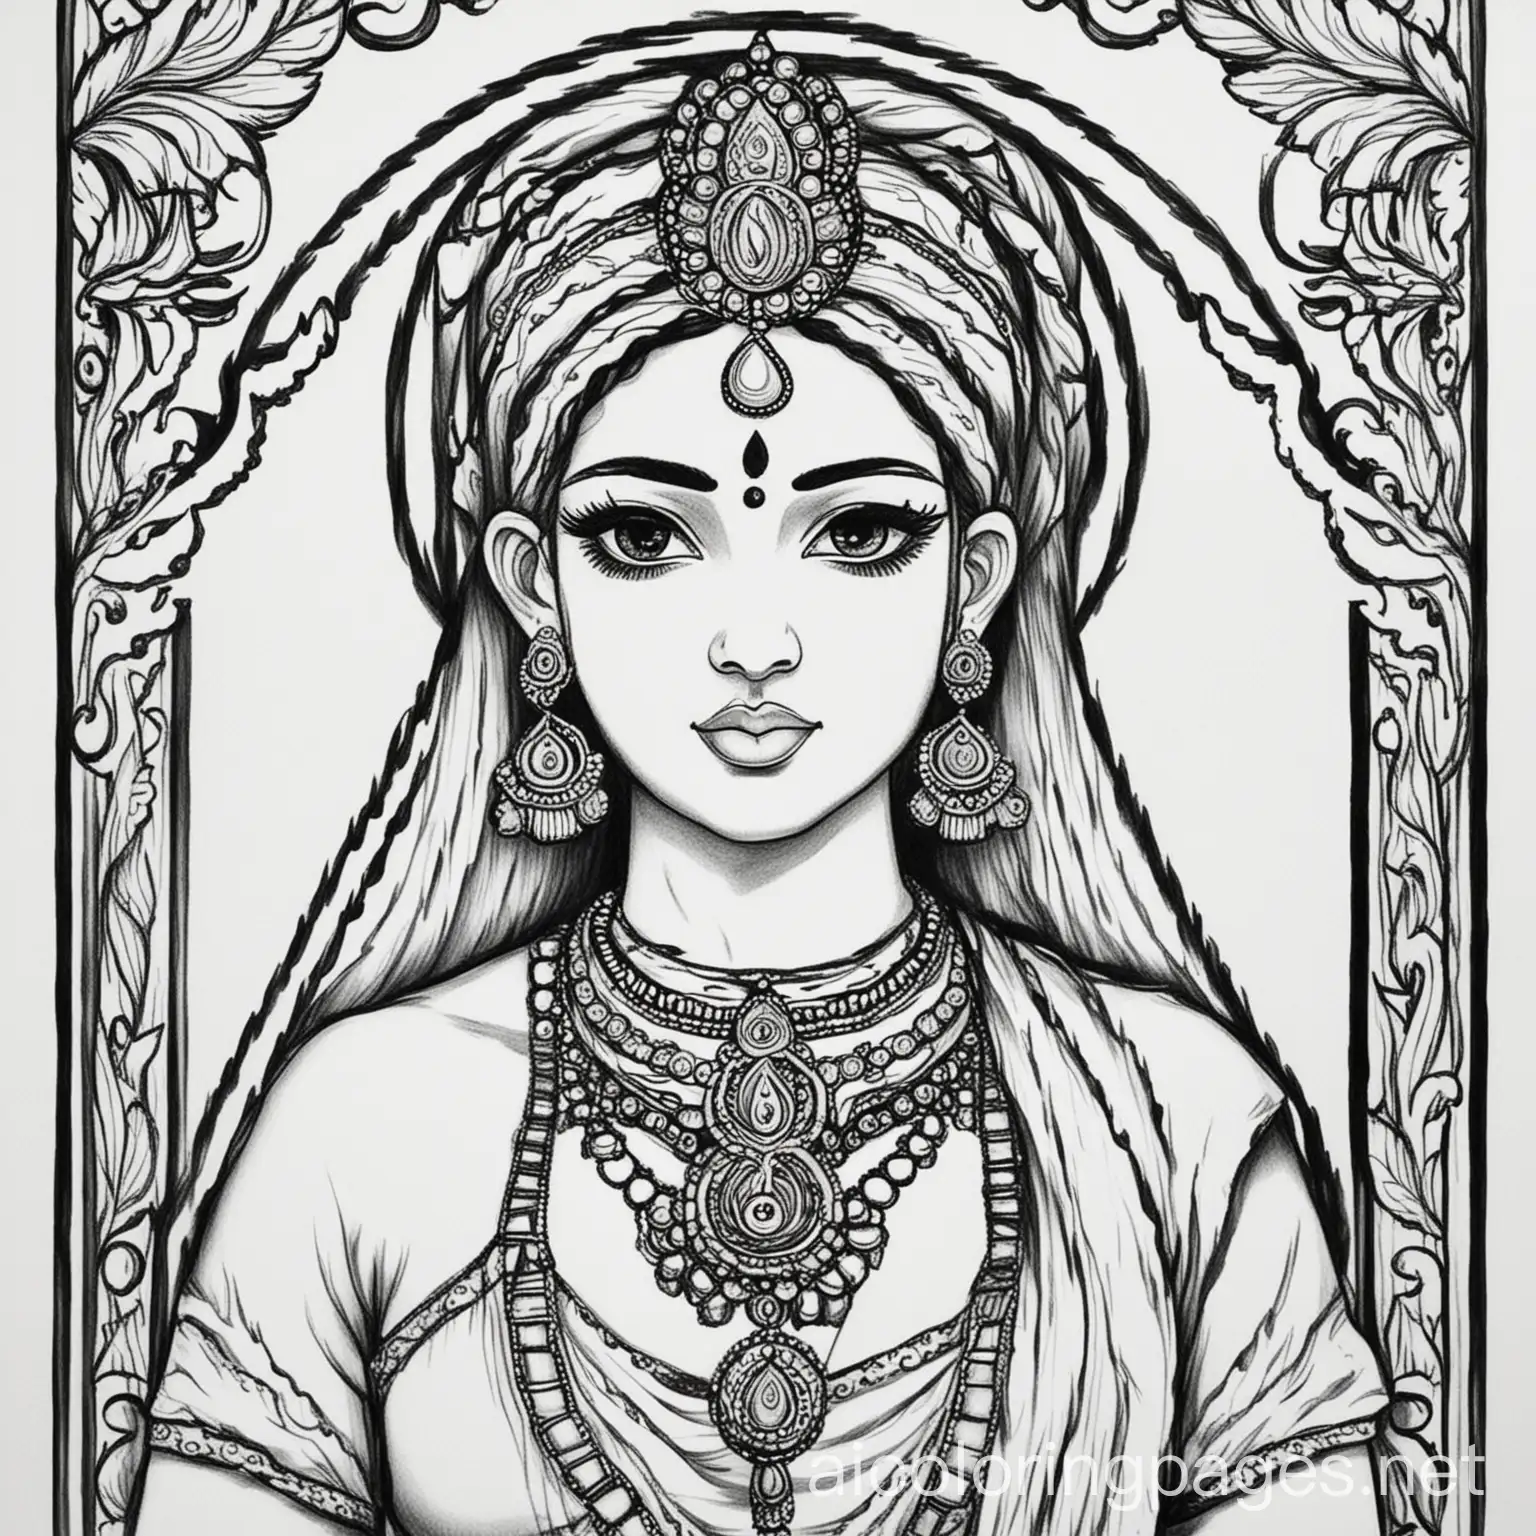 Devi sati, Coloring Page, black and white, line art, white background, Simplicity, Ample White Space. The background of the coloring page is plain white to make it easy for young children to color within the lines. The outlines of all the subjects are easy to distinguish, making it simple for kids to color without too much difficulty